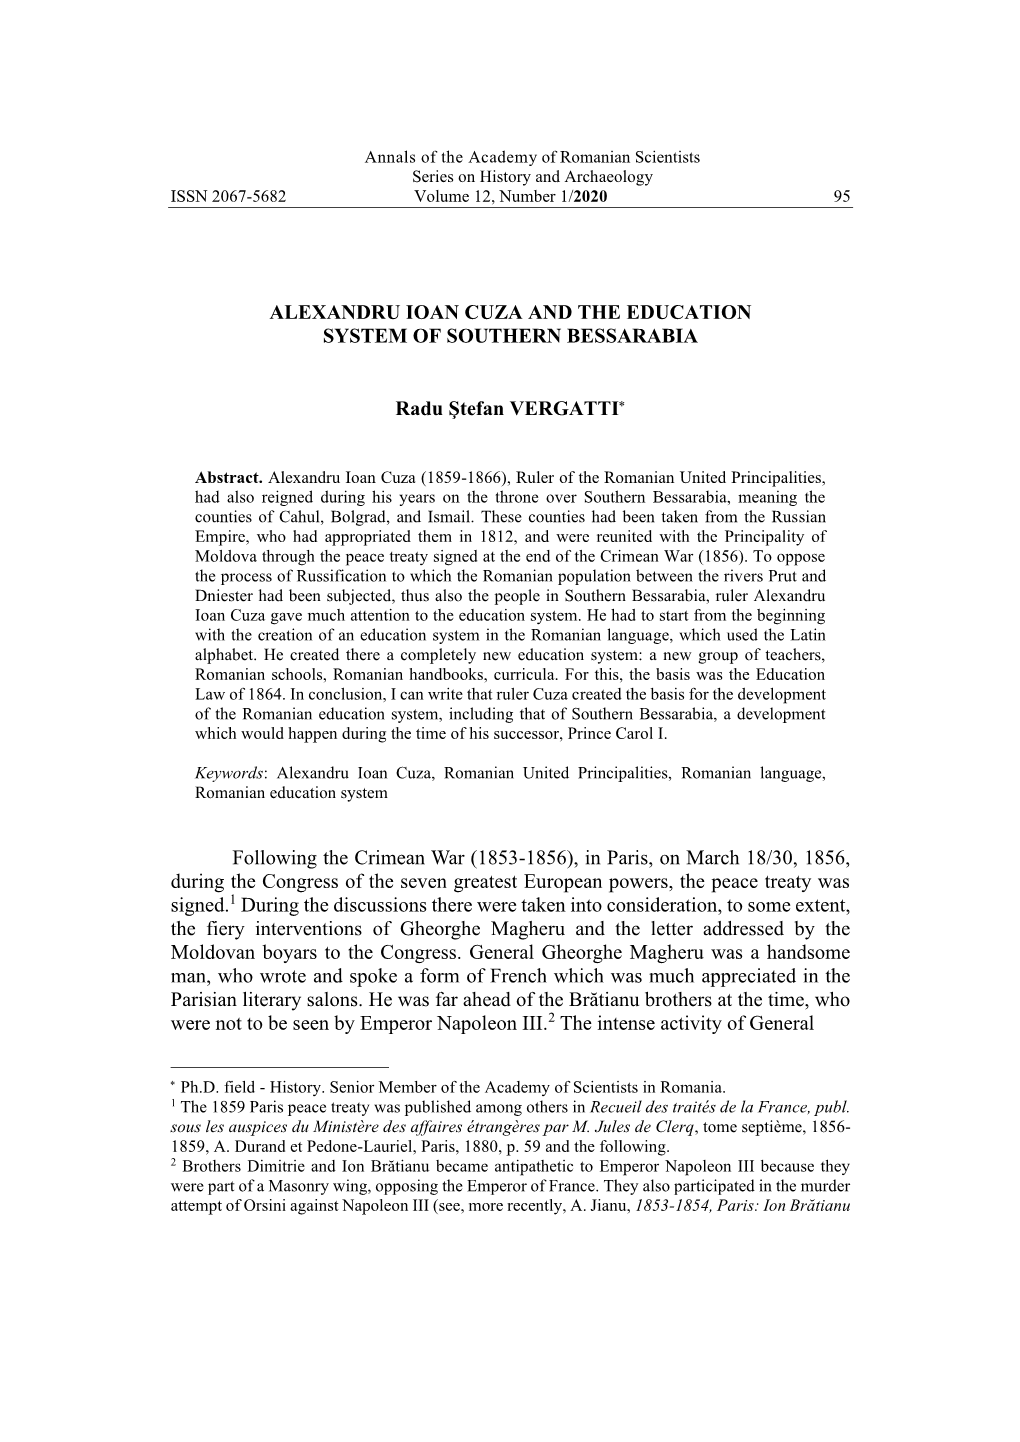 Academy of Romanian Scientists Series on History and Archaeology ISSN 2067-5682 Volume 12, Number 1/2020 95